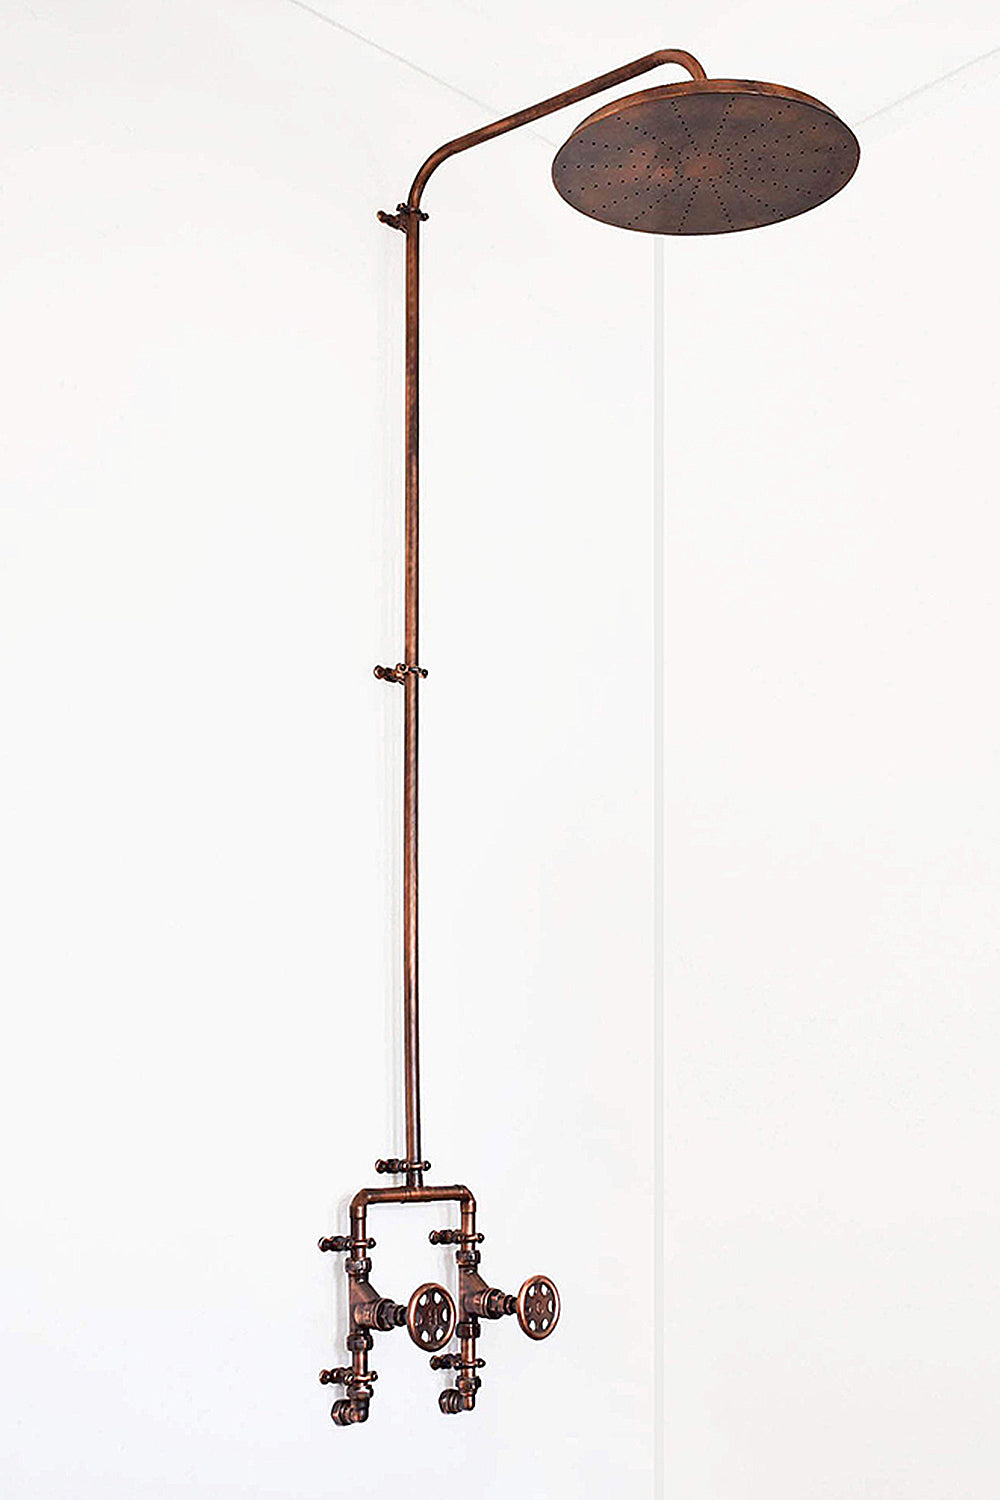 Aged copper shower against white background